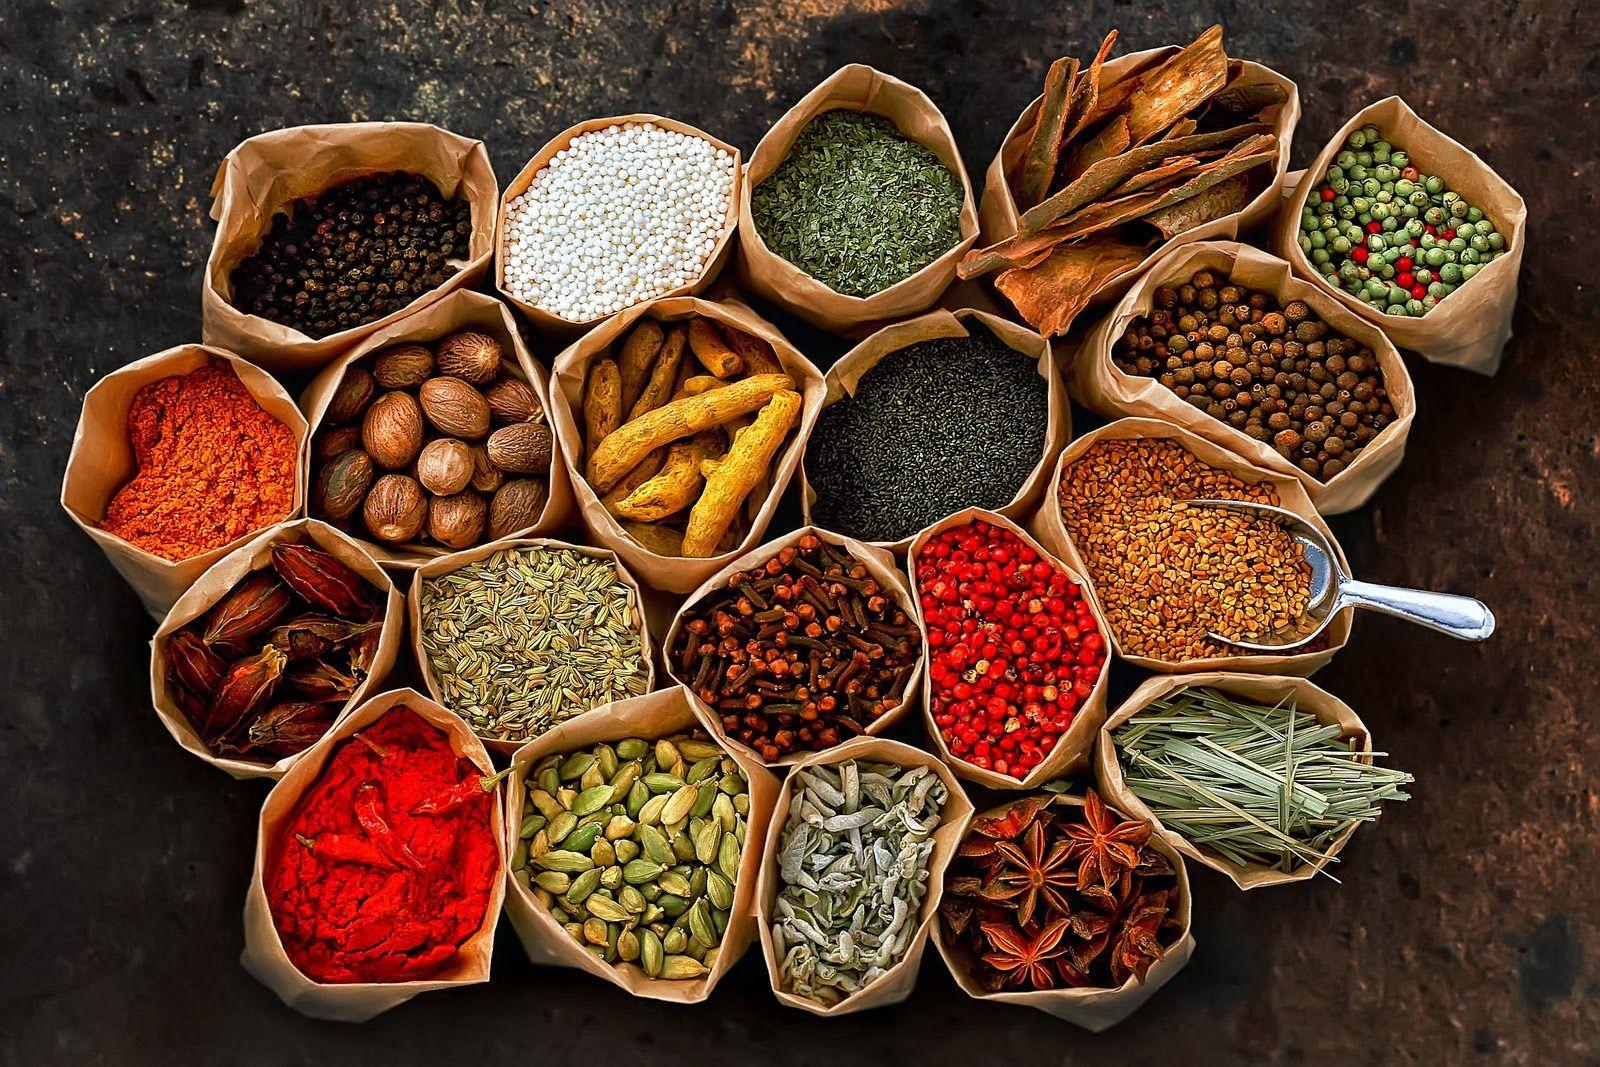 Herbs And Spices wallpaper, Food, HQ Herbs And Spices pictureK